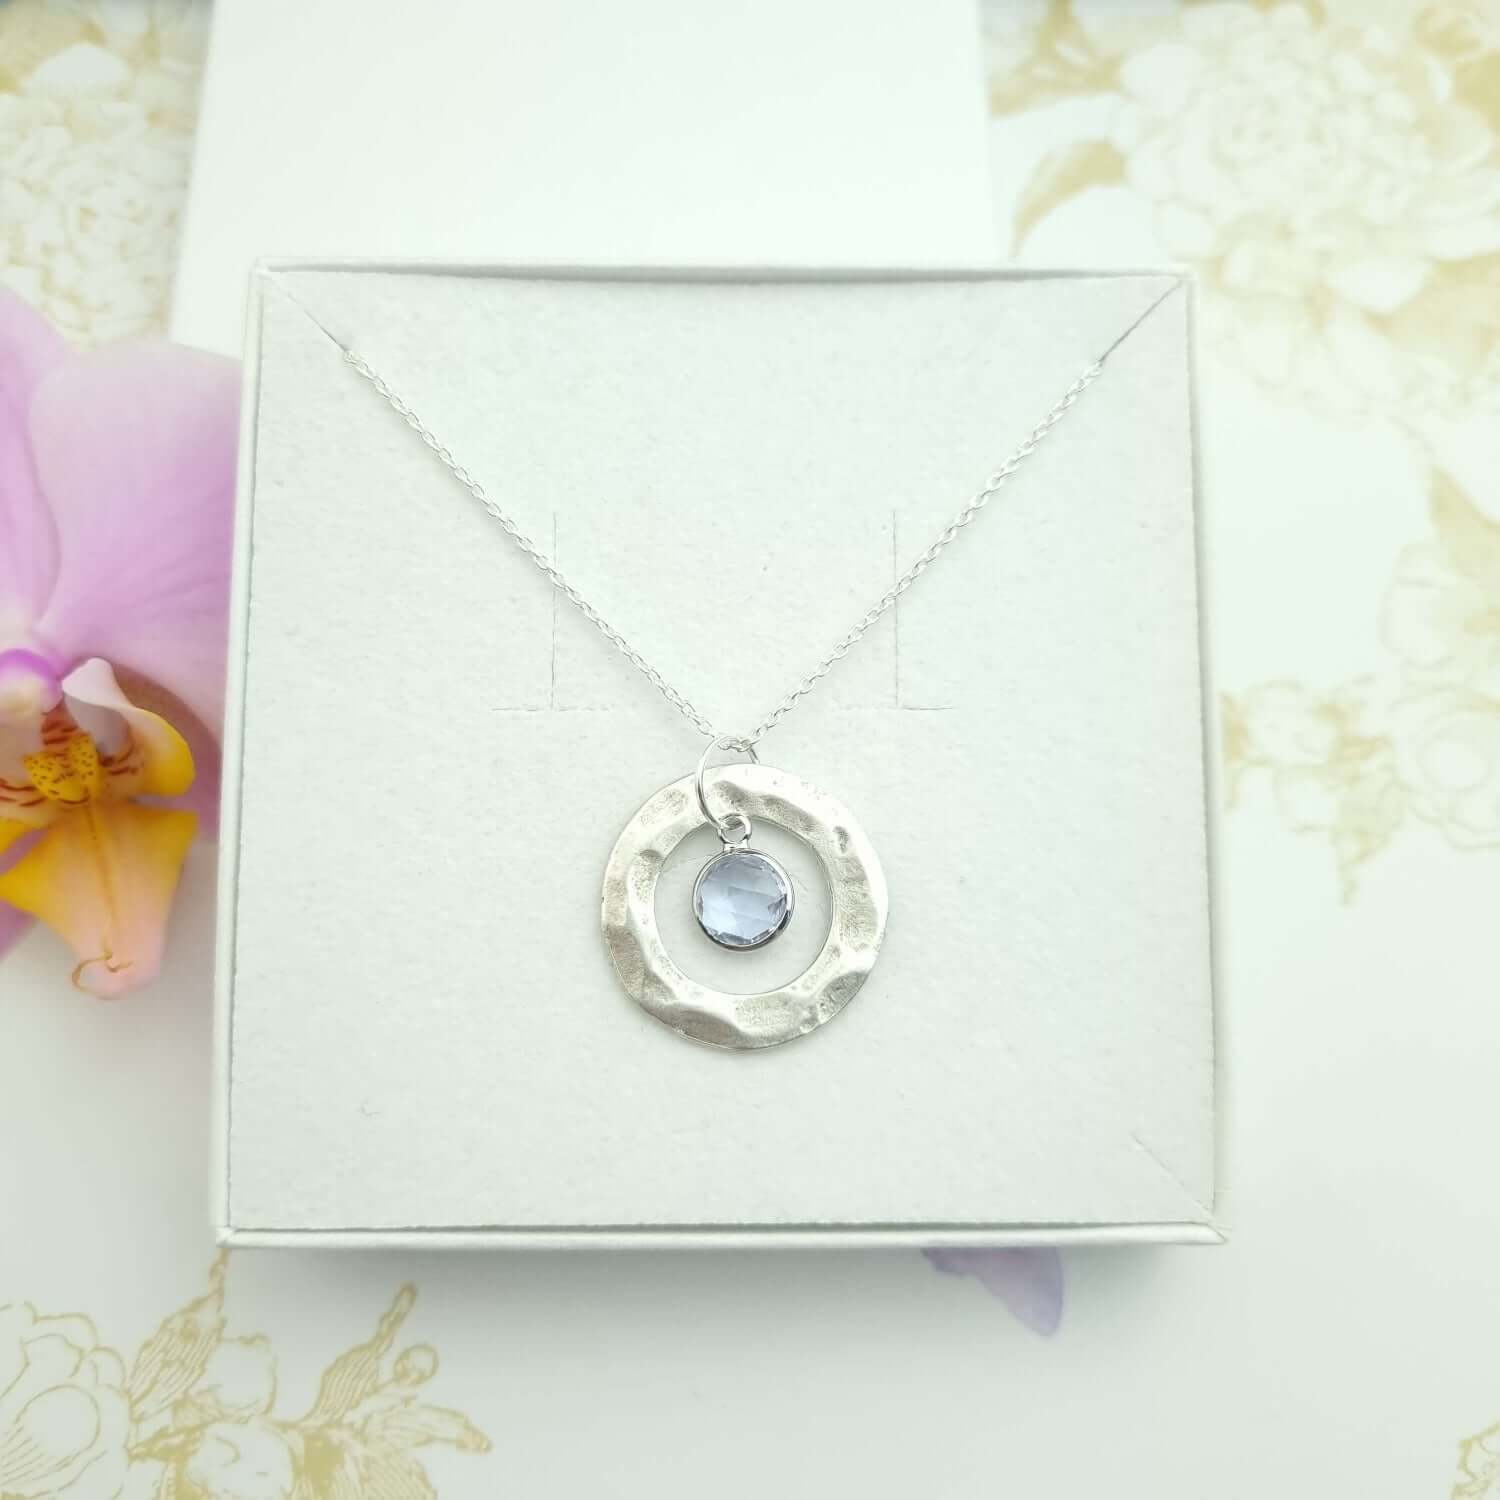 Family birthstone silver necklace